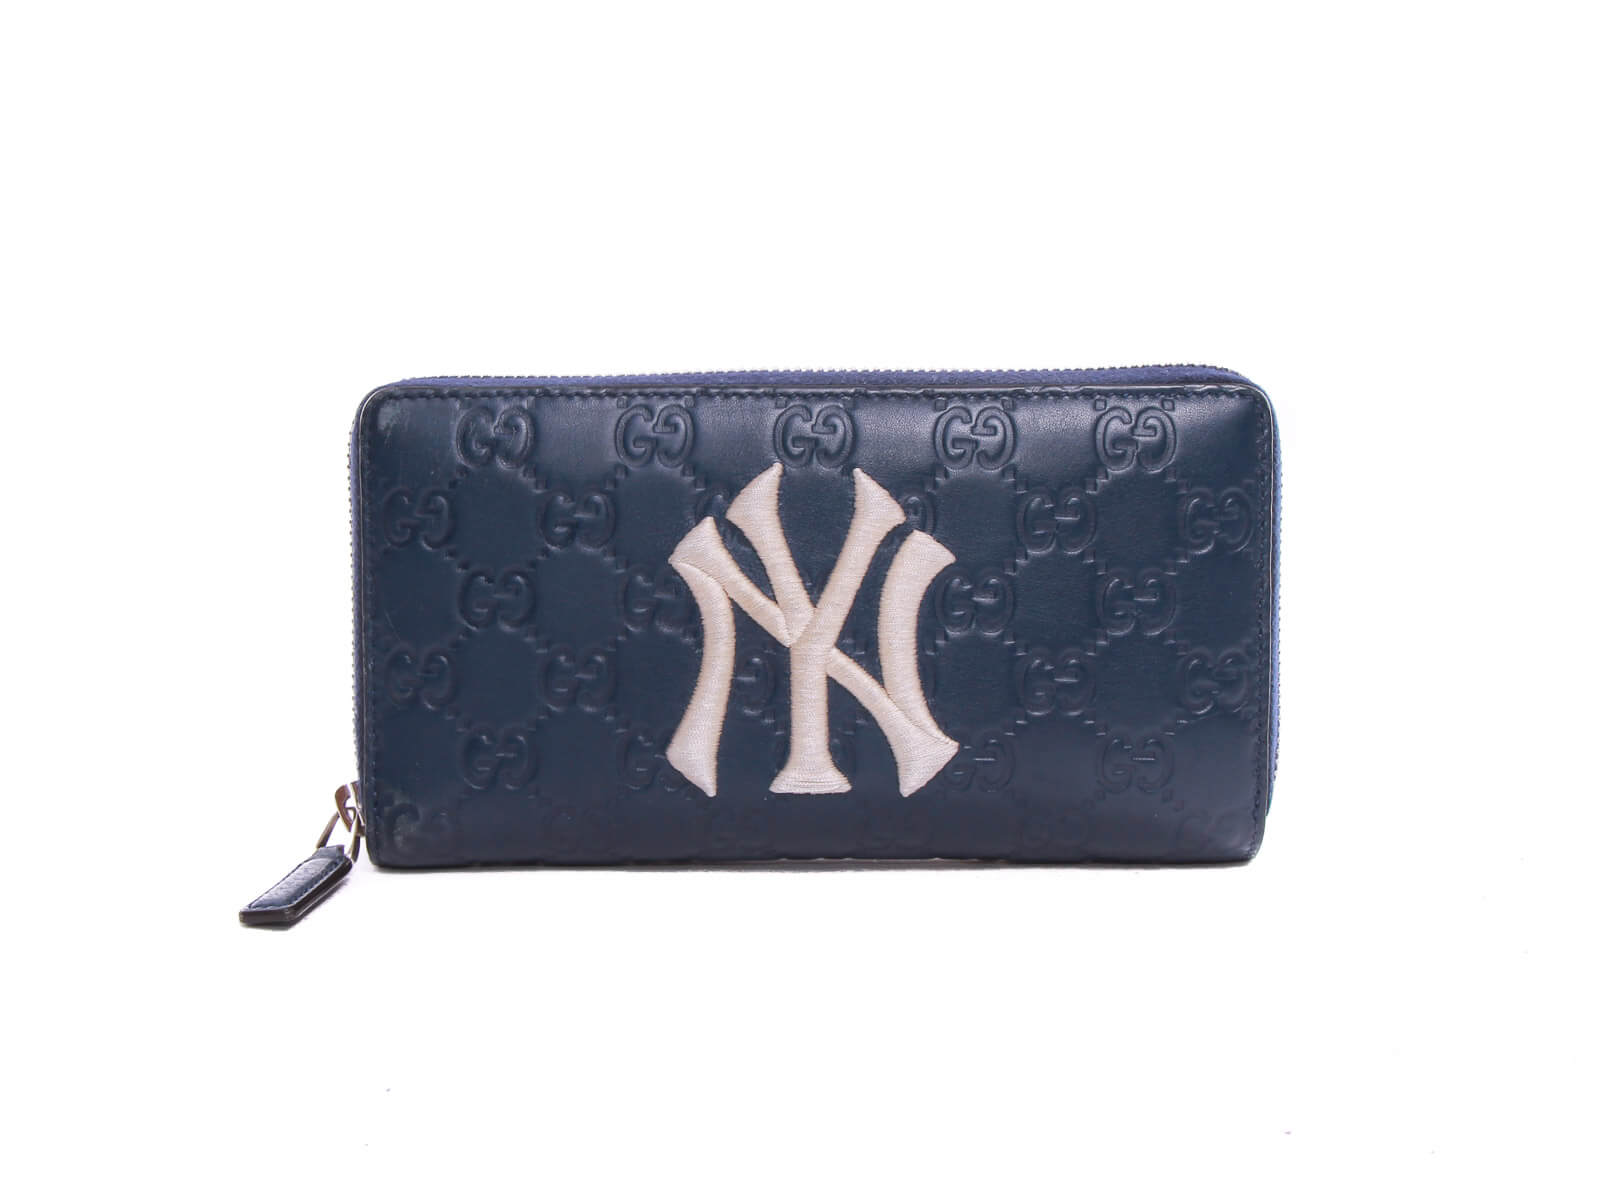 Authentic Gucci Guccissima NY Yankees Zip Around Wallet Blue